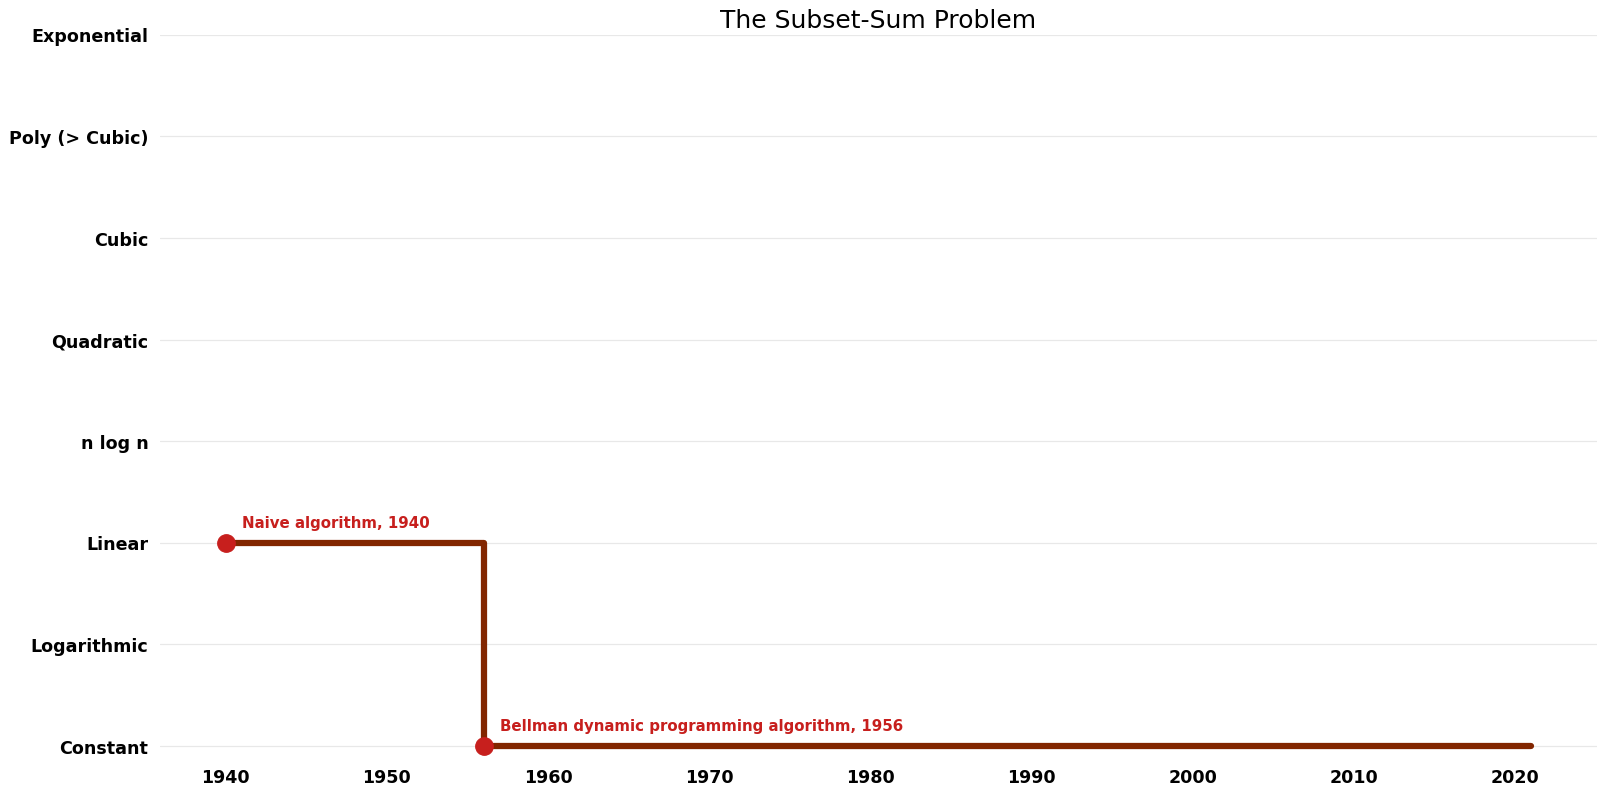 File:The Subset-Sum Problem - Space.png